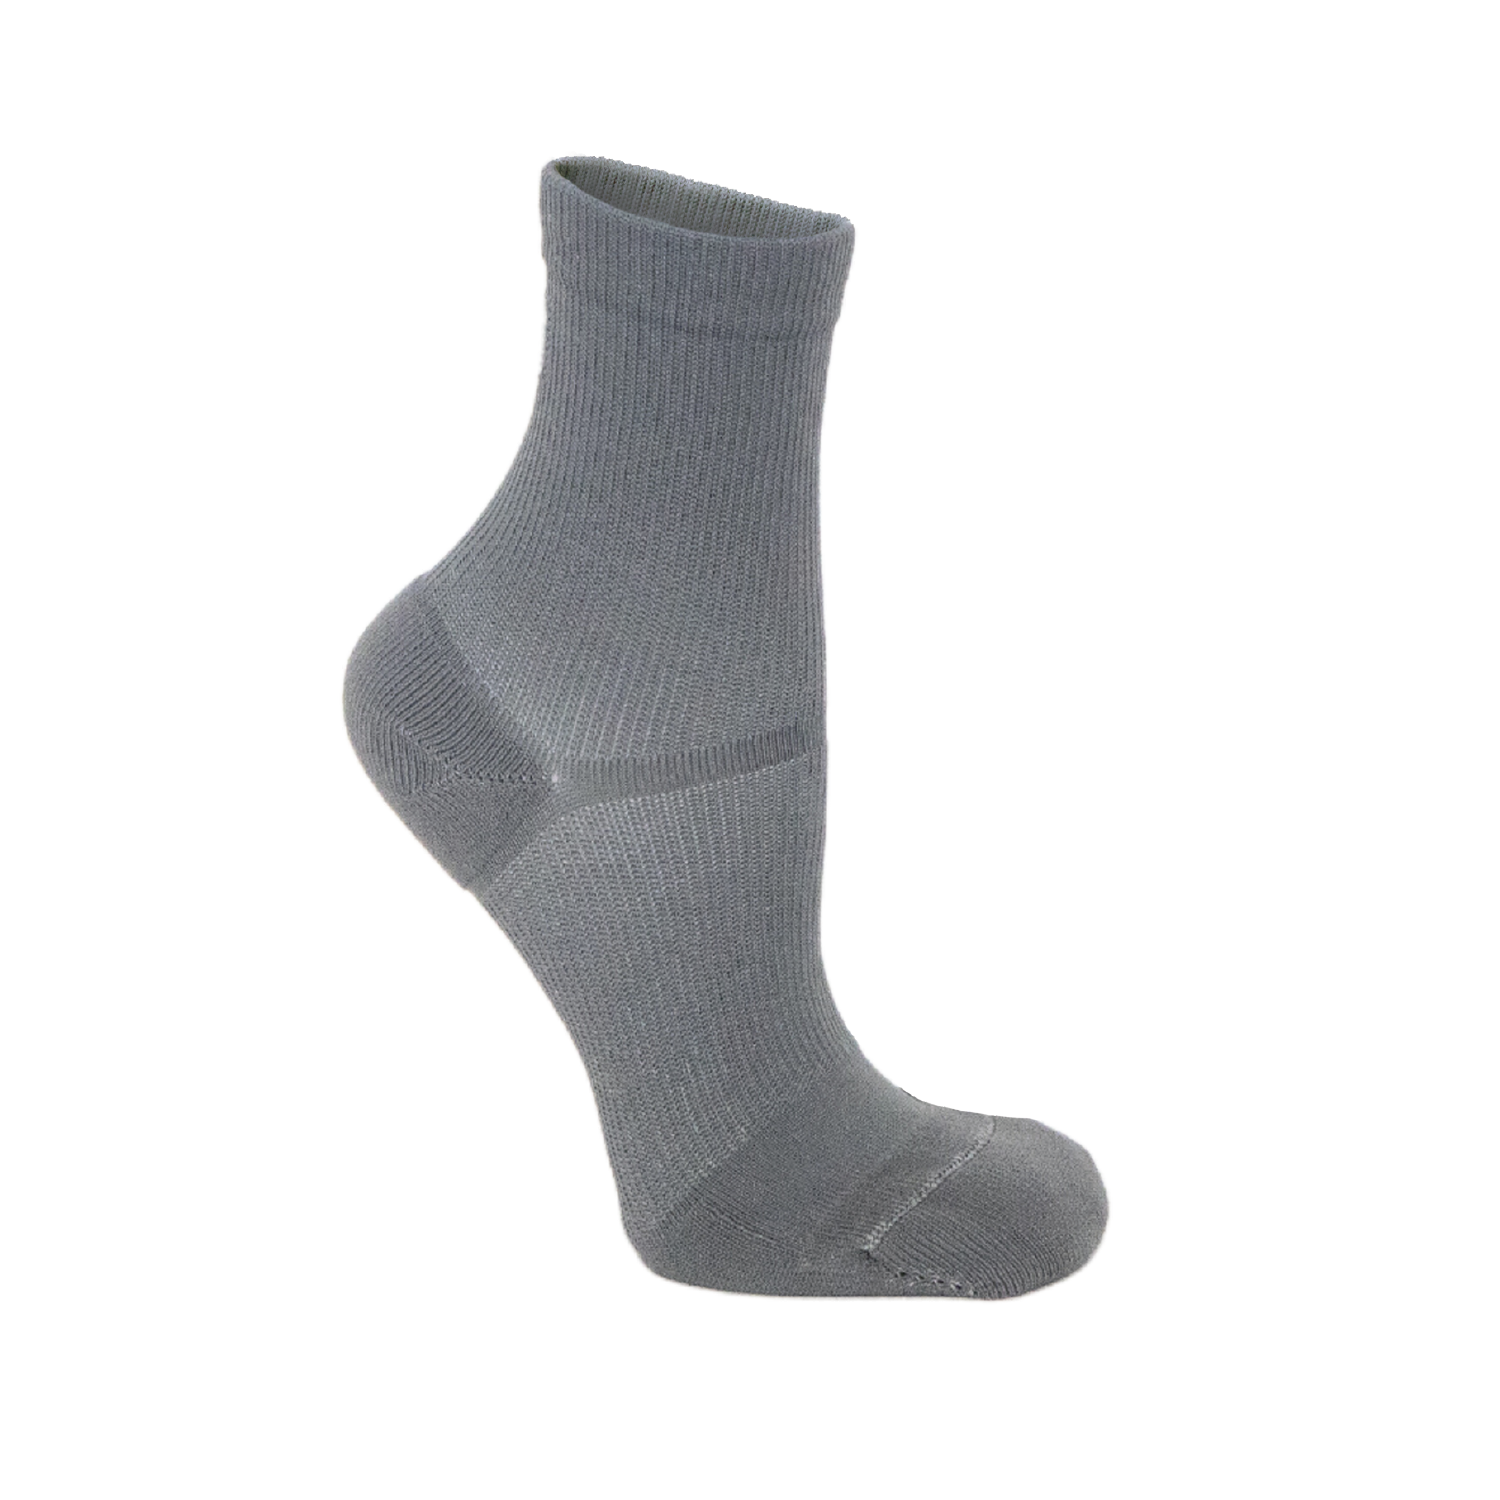 Apolla Performance Socks with Traction